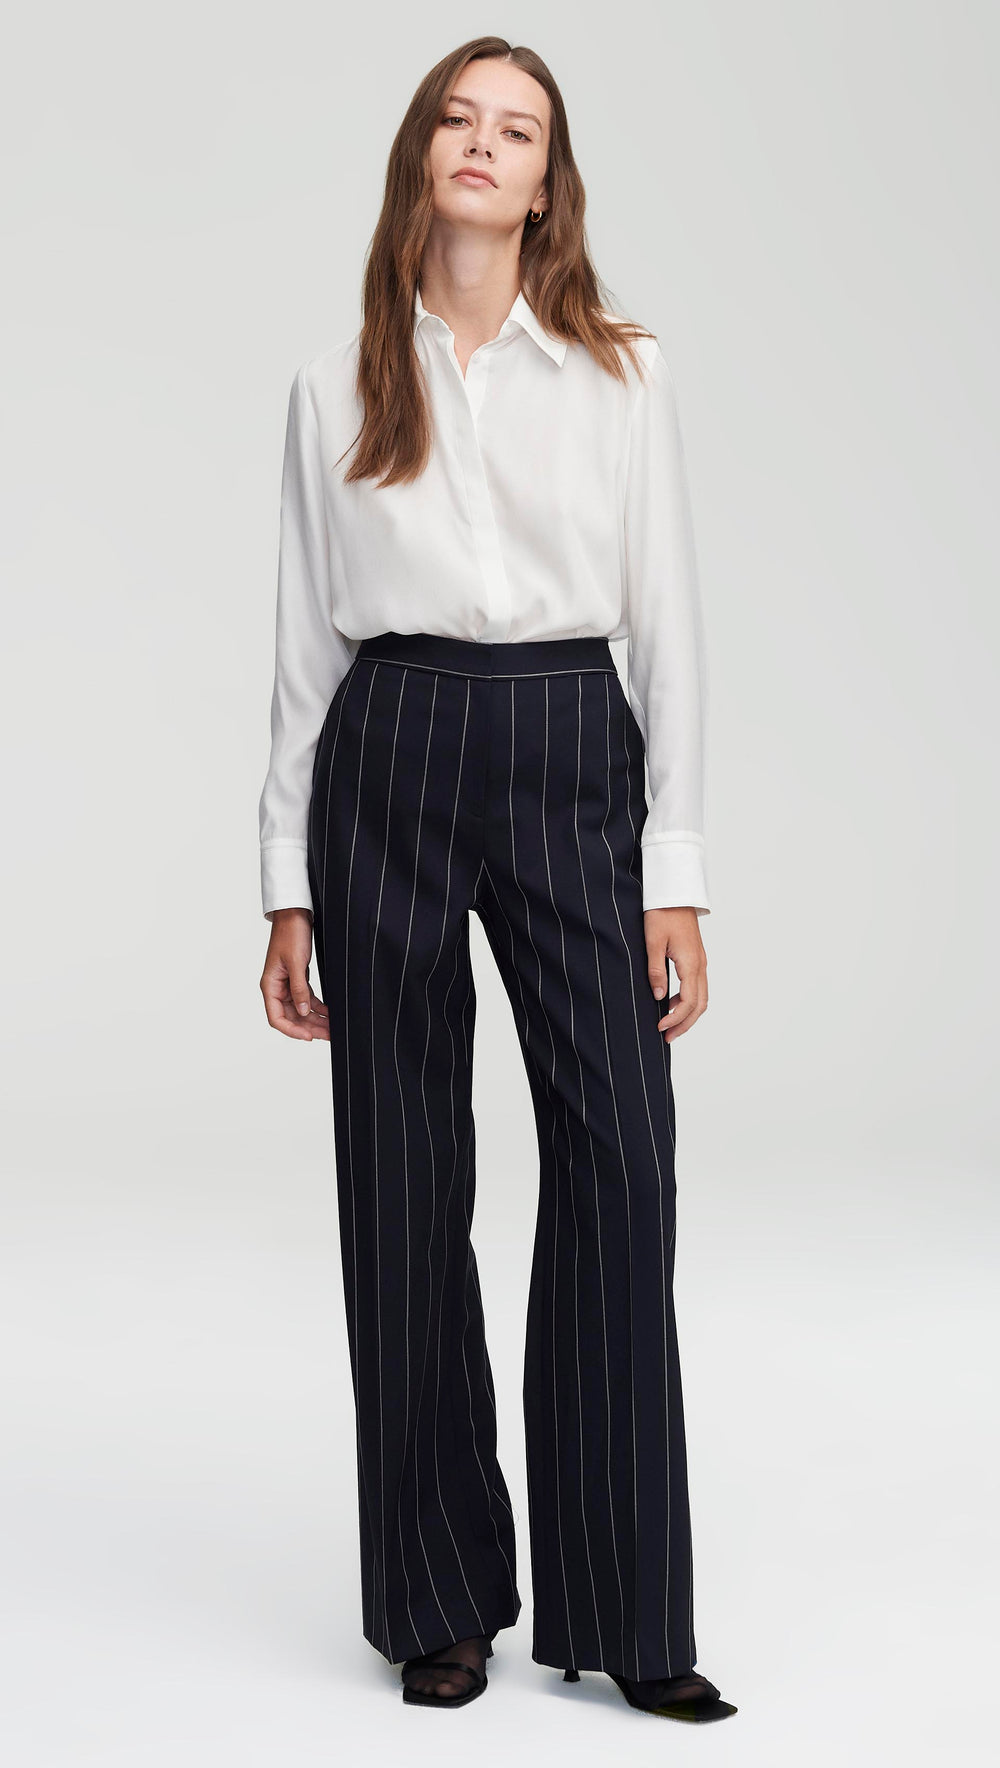 Loulou Studio Formal Trousers & Hight Waist Pants for Women sale -  discounted price | FASHIOLA.in